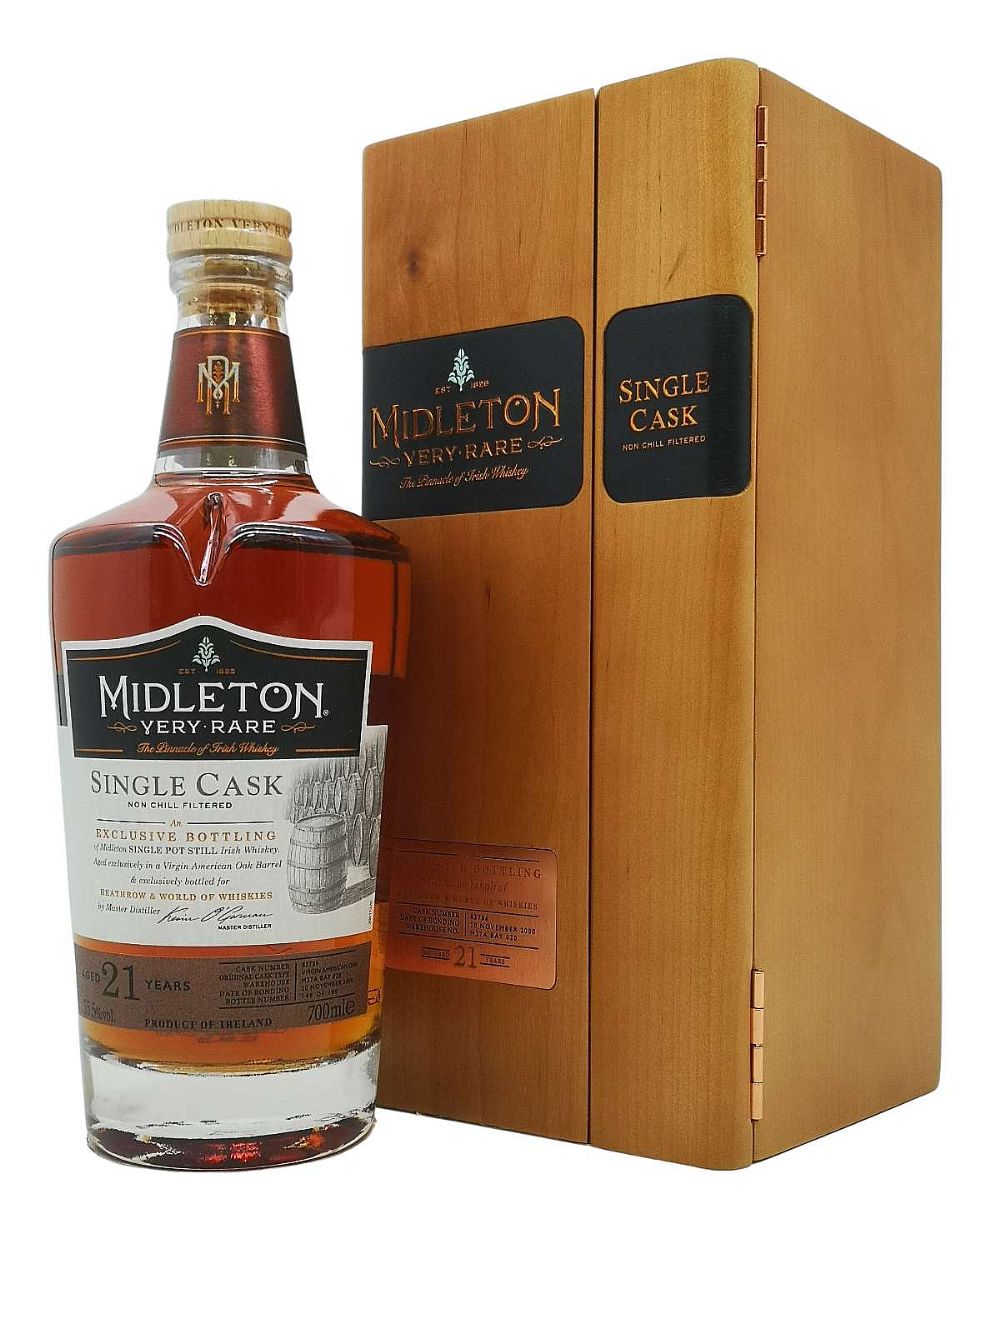 Midleton Very Rare Single Cask, Heathrow & World of Whiskies Exclusive, 21 year old